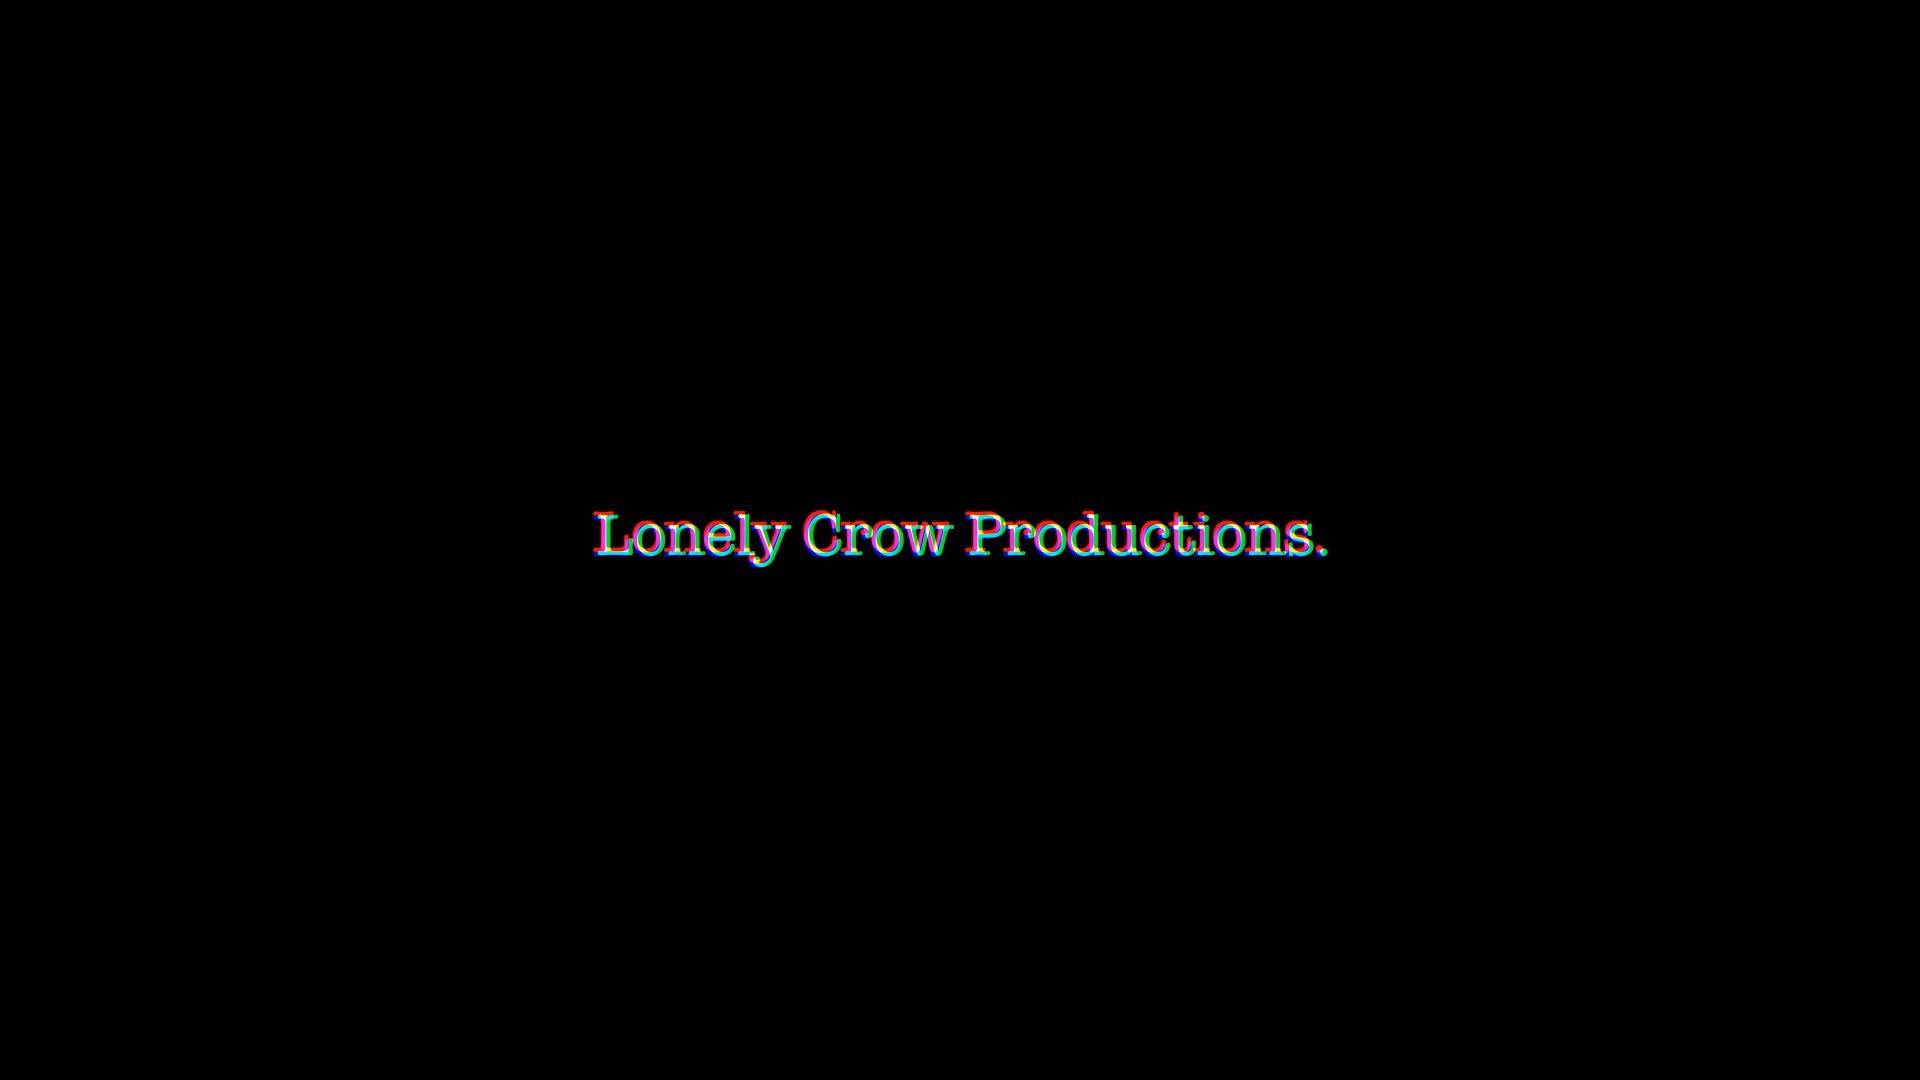 LC Productions Logo - Lonely Crow Productions